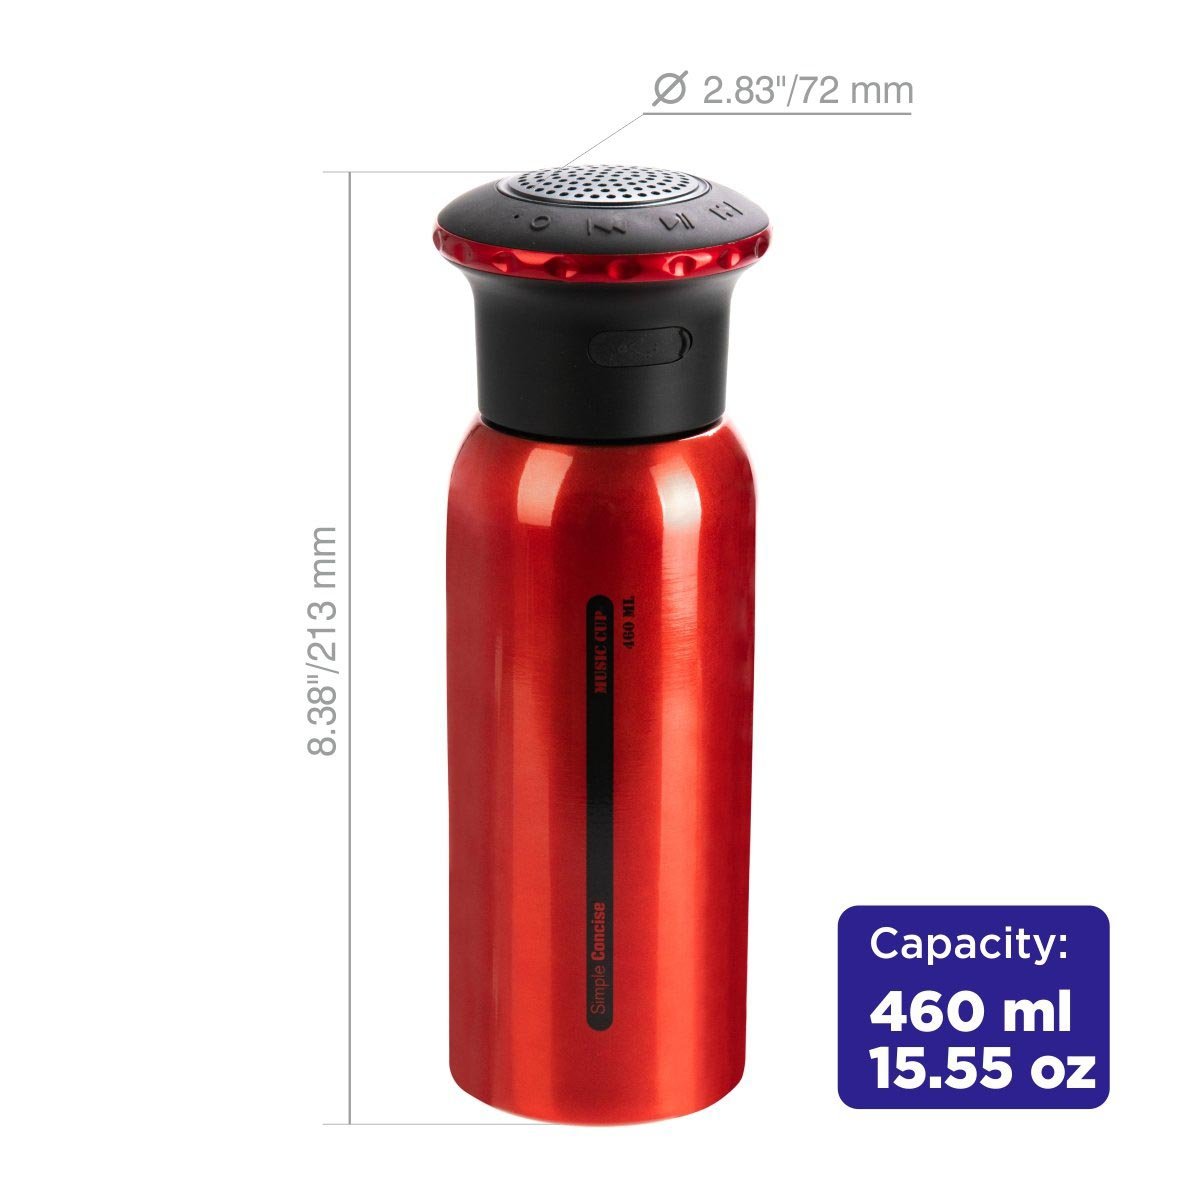 Insulated Water Bottle with Bluetooth Speaker, Red, 15 oz is 8.4 inches high and 2.83 inches wide